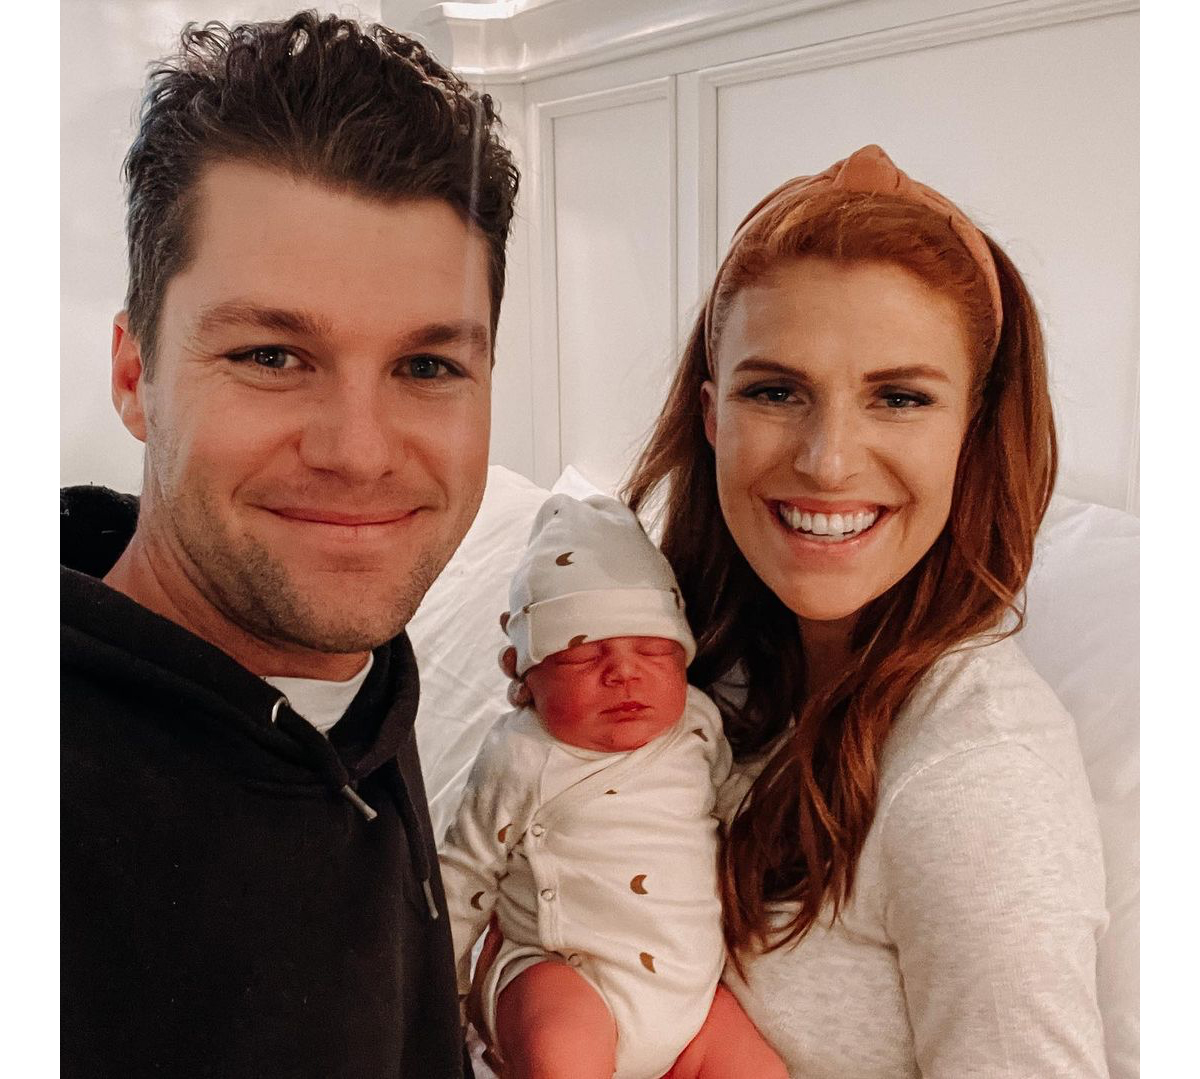 https://www.usmagazine.com/wp-content/uploads/2021/11/Sweet-Selfie-Jeremy-James-Roloff-Instagram-Little-People-Big-World-Jeremy-Roloff-and-Audrey-Roloff-Welcome-Their-3rd-Child.jpg?quality=82&strip=all